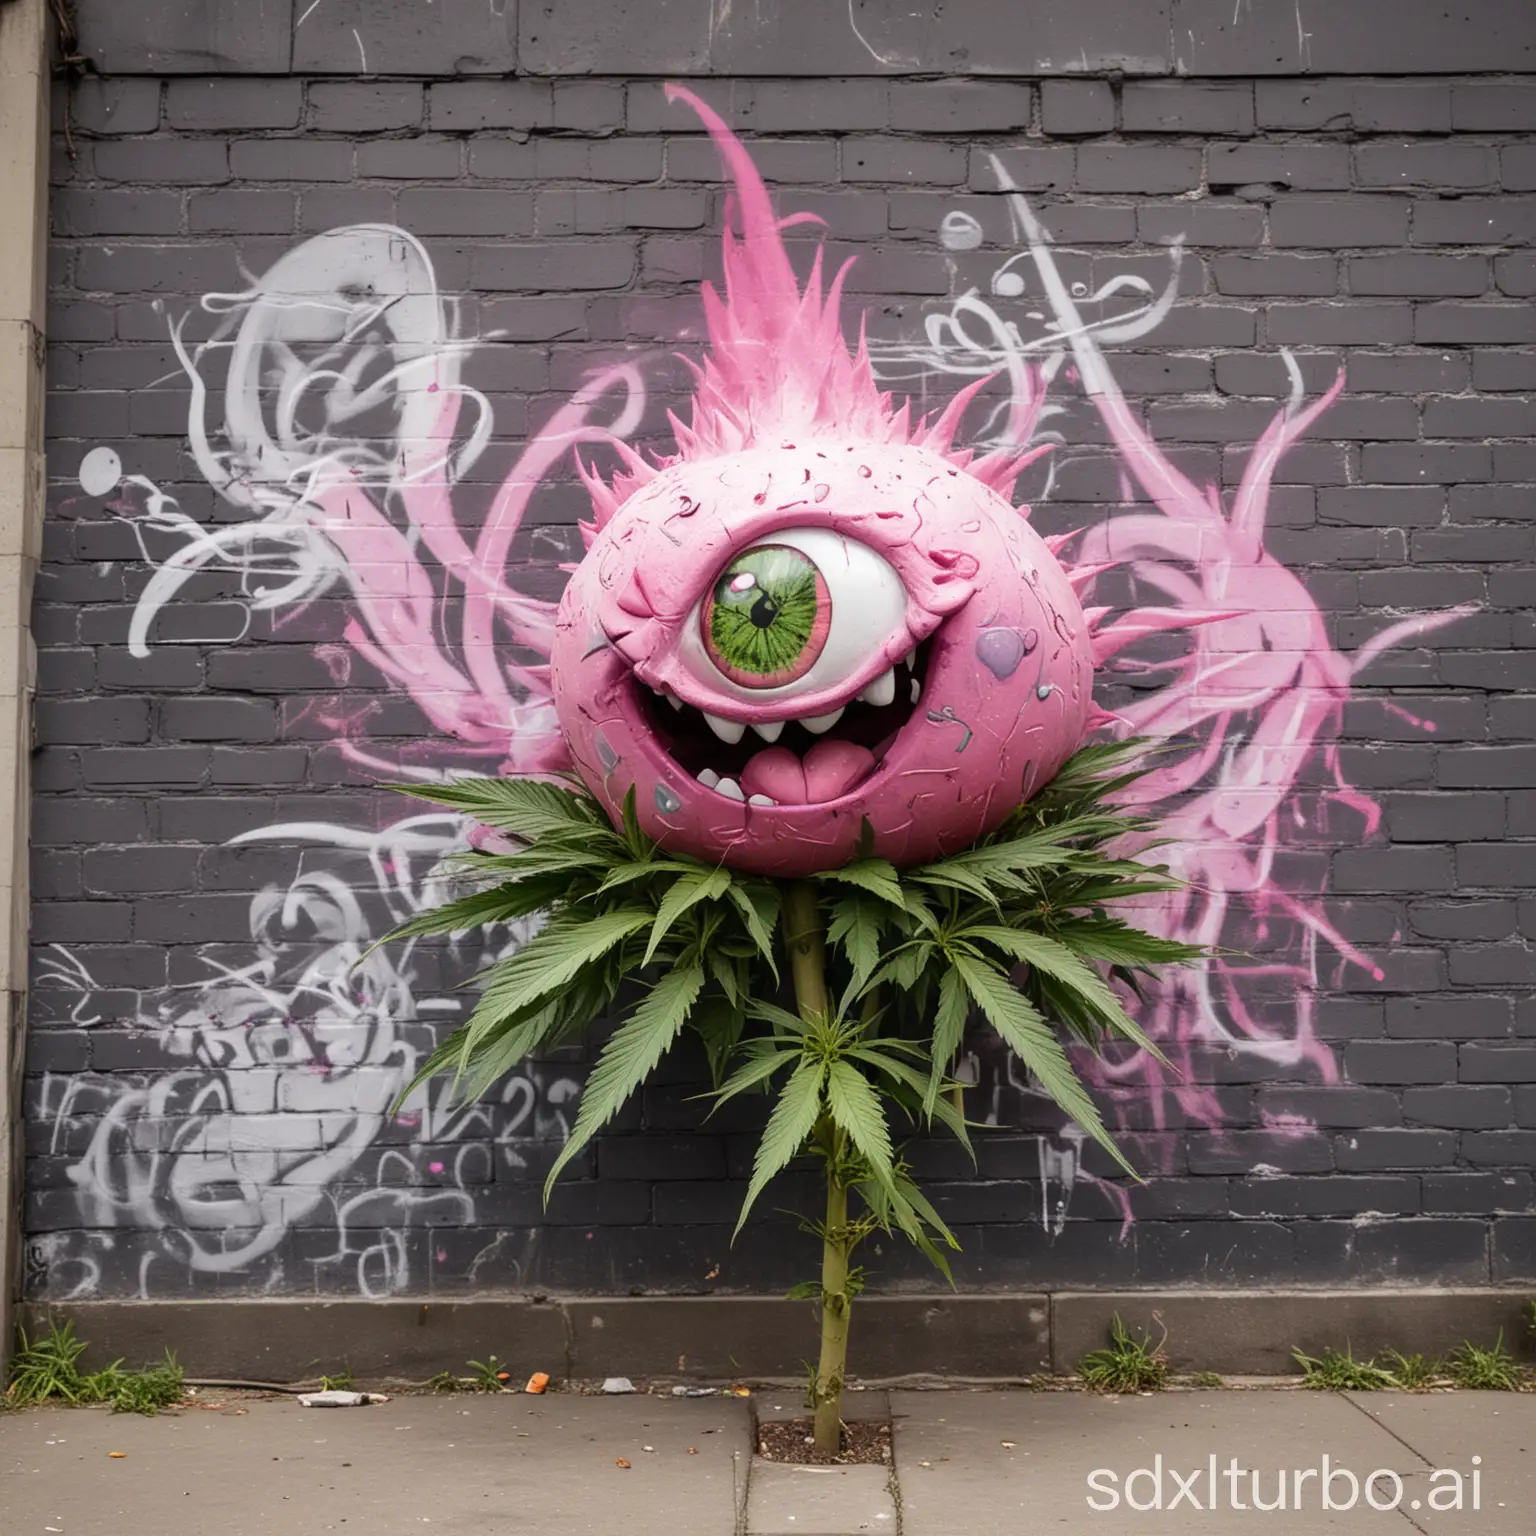 cannabis mascot graffiti style,  cool cannabis bud, cannabis bud,  2 legs pink eyes, looks like the Pokemon bisasam, laughs, a big joint in the mouth, knobby,  4 arms